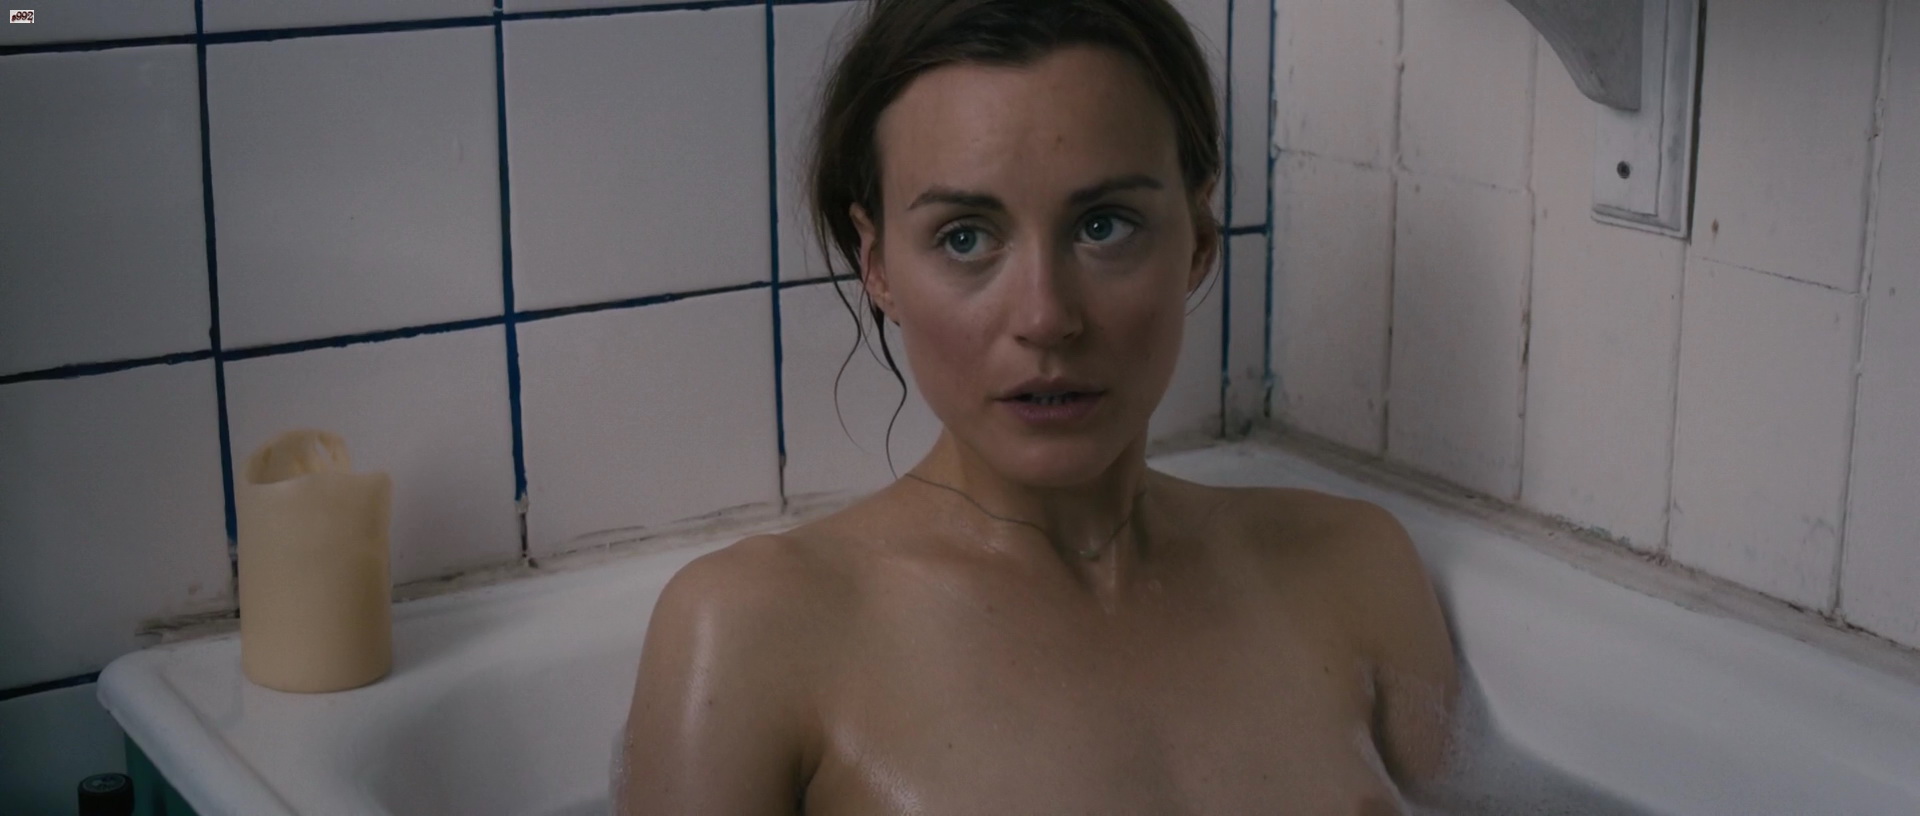 Taylor Schilling - Stay (2013) HD 1080p